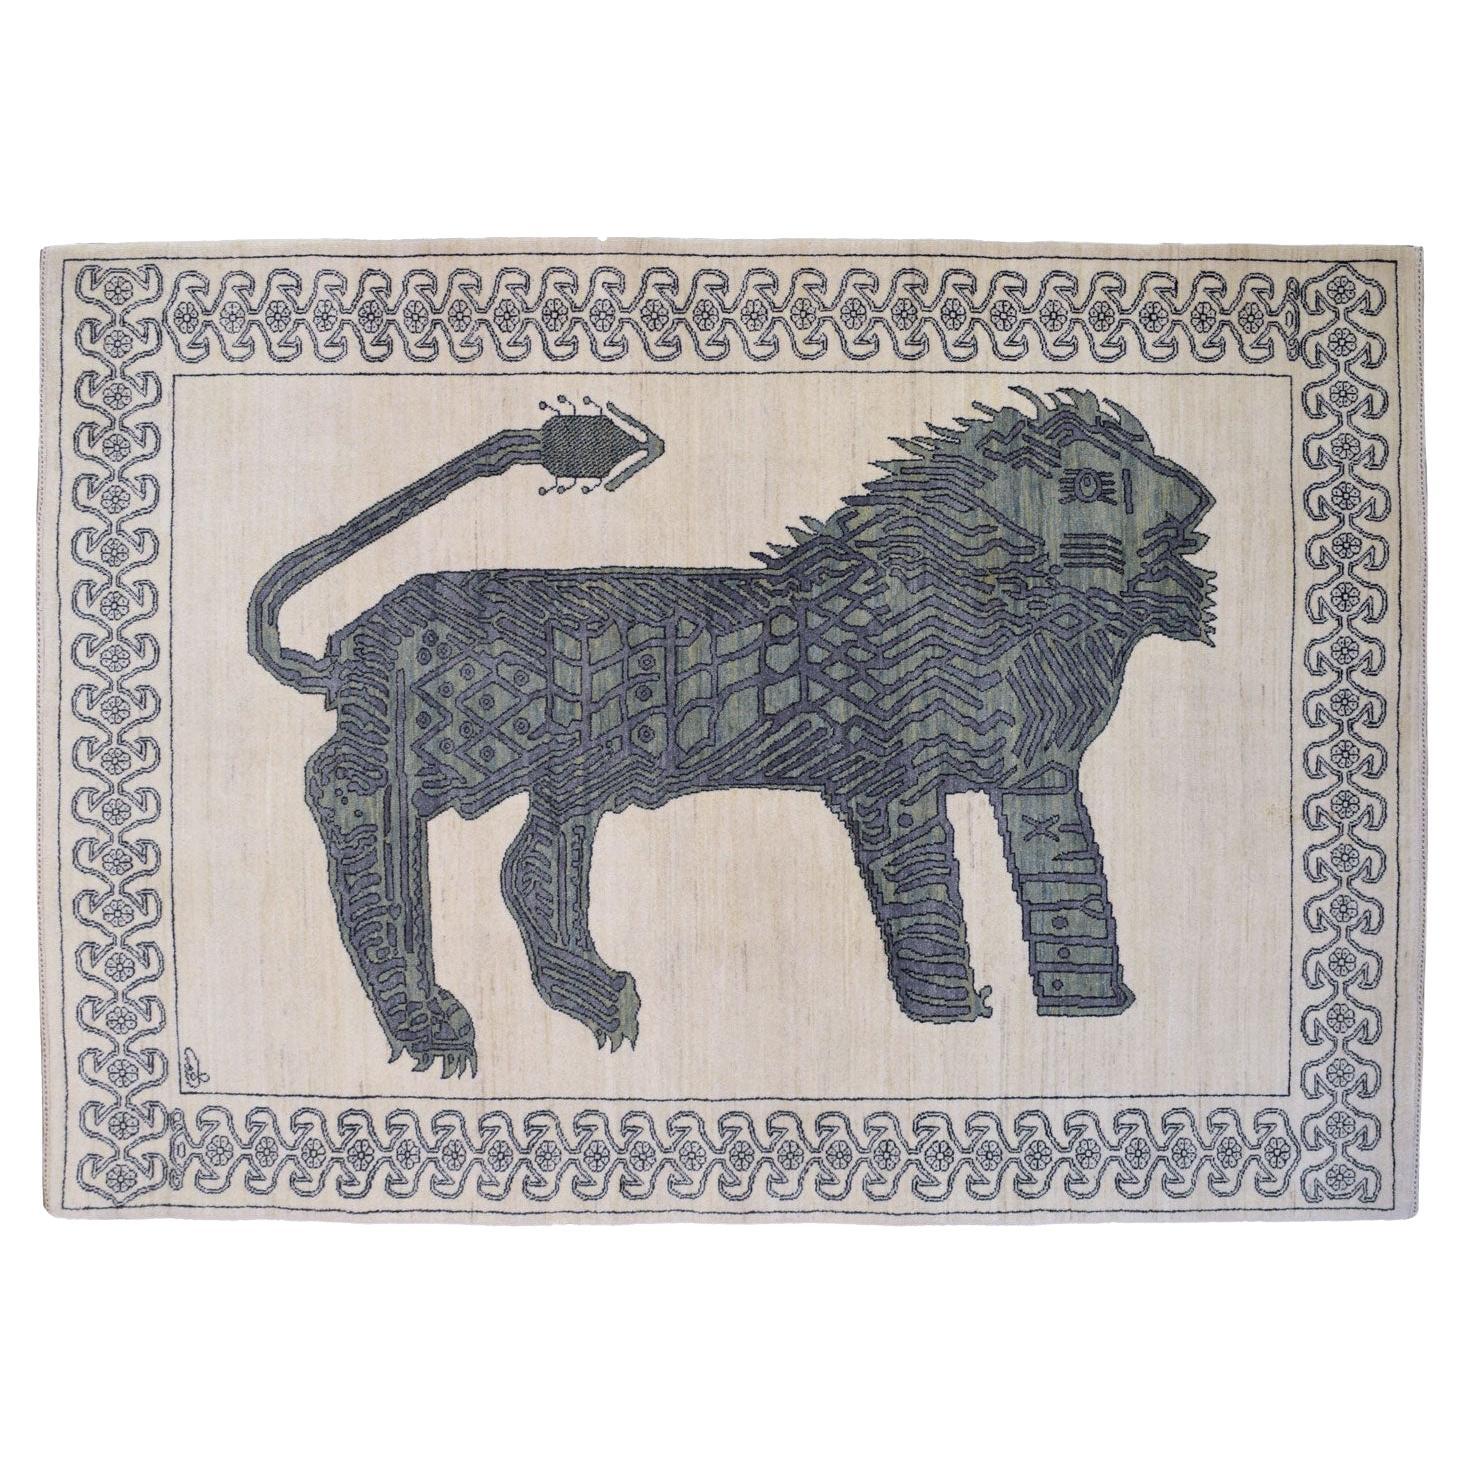 Orley Shabahang "Majesty" Lion Persian Wool Carpet, 5' x 7'